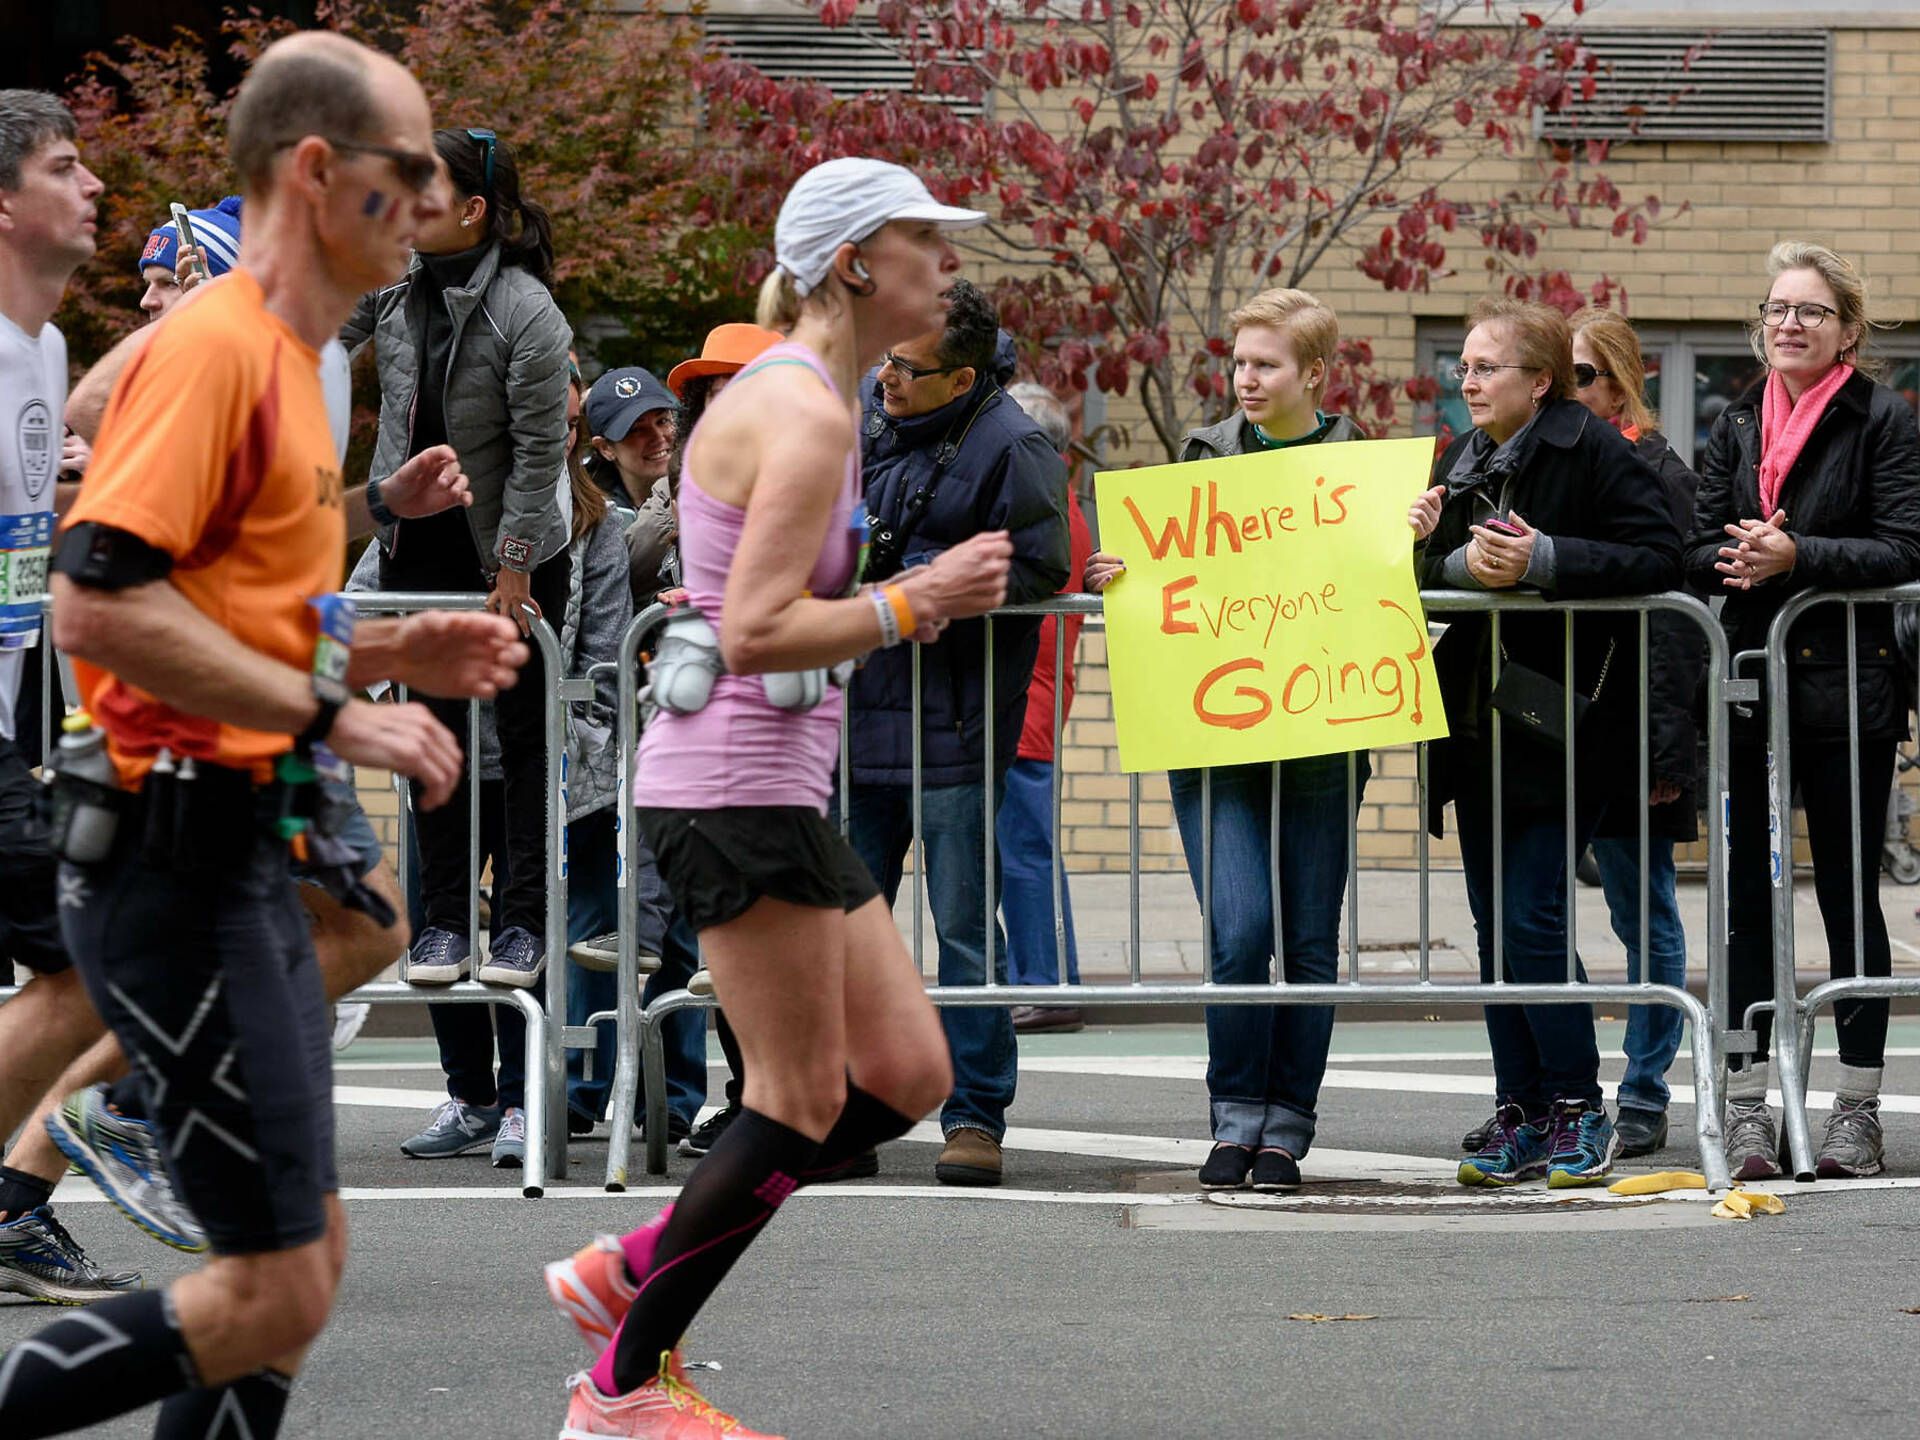 20 photos of the NYC Marathon's spectators and best signs